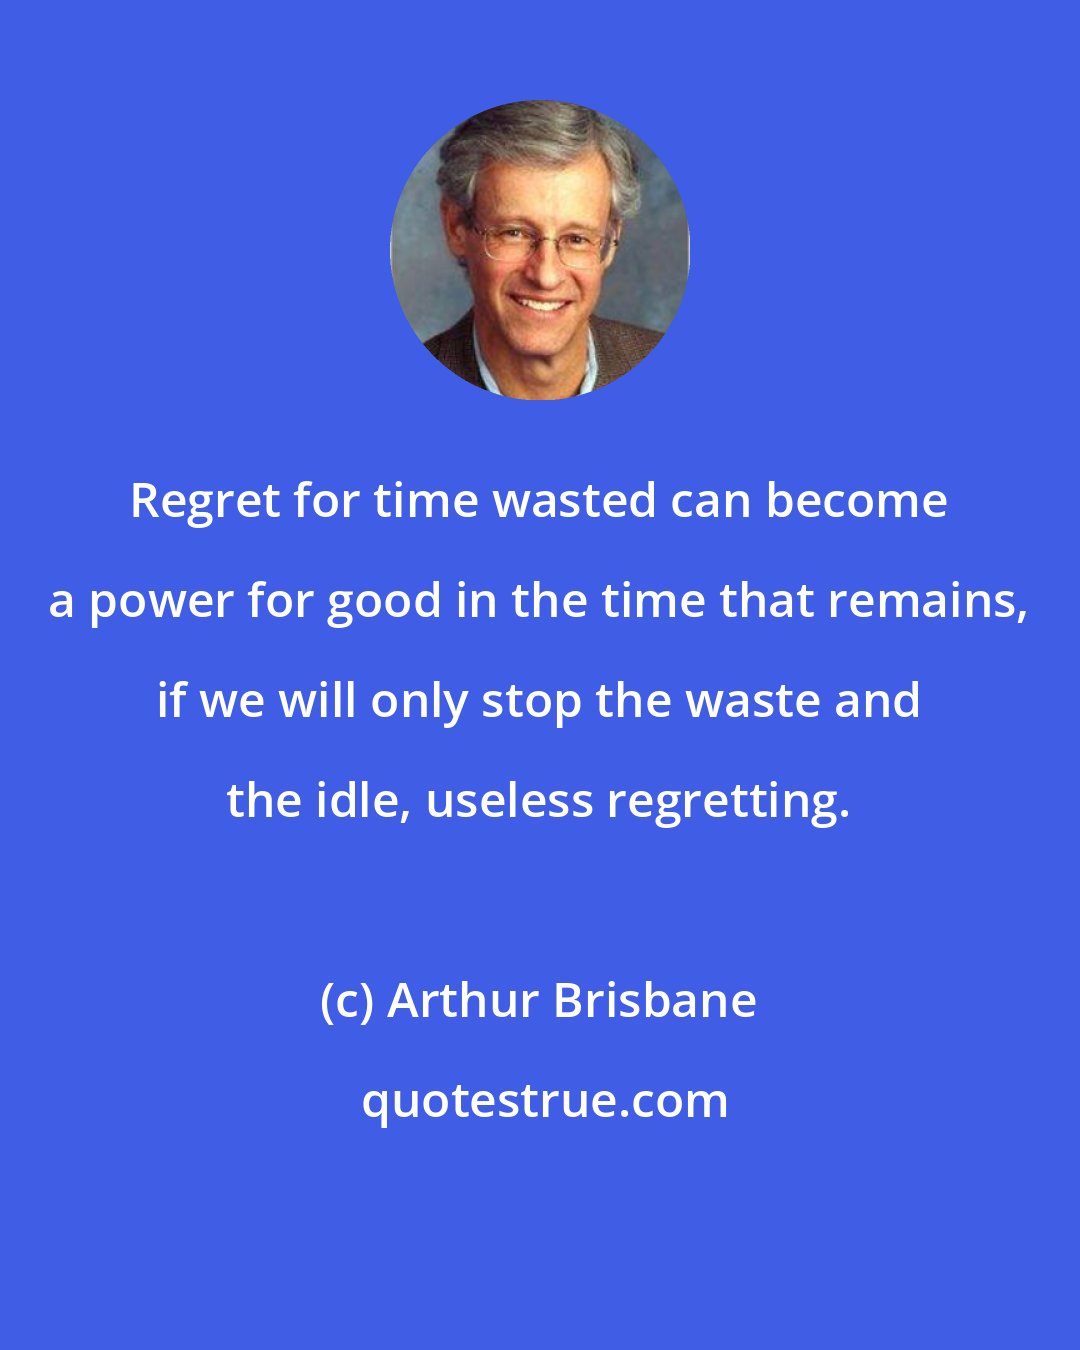 Arthur Brisbane: Regret for time wasted can become a power for good in the time that remains, if we will only stop the waste and the idle, useless regretting.